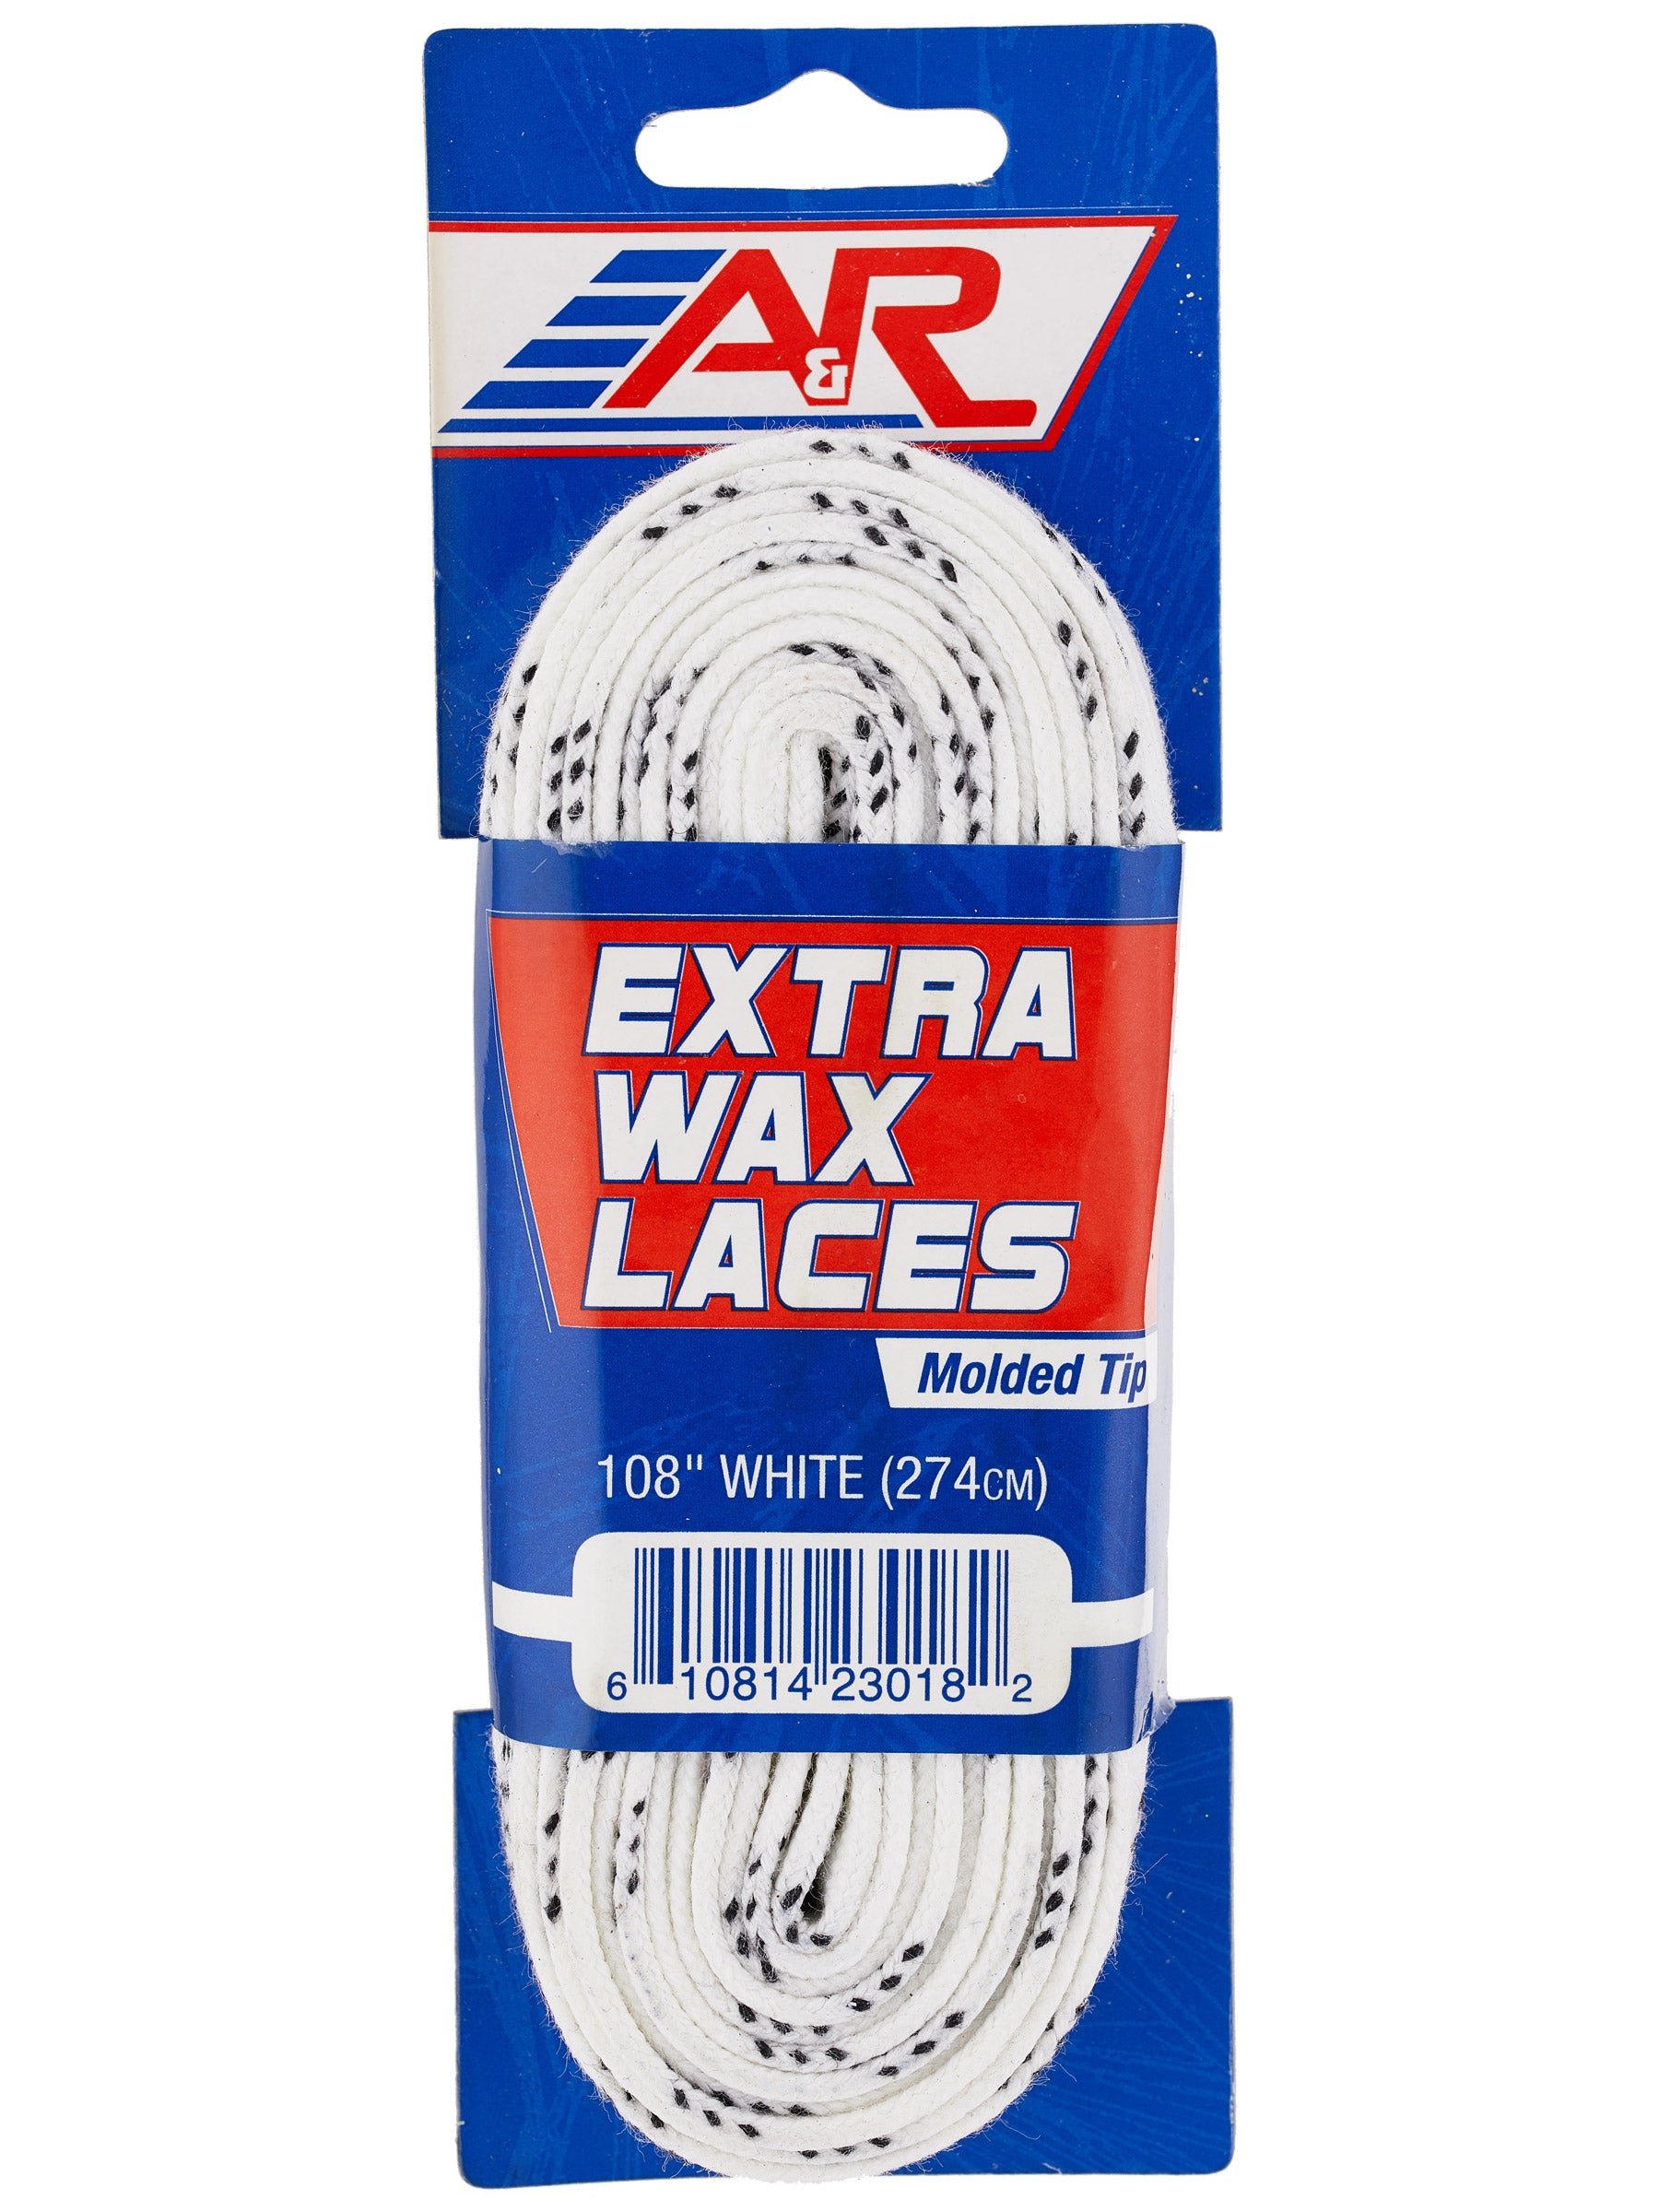 SIDELINES Sports Wax Laces,Ice Hockey Laces,Roller Hockey Laces,Skate Laces 